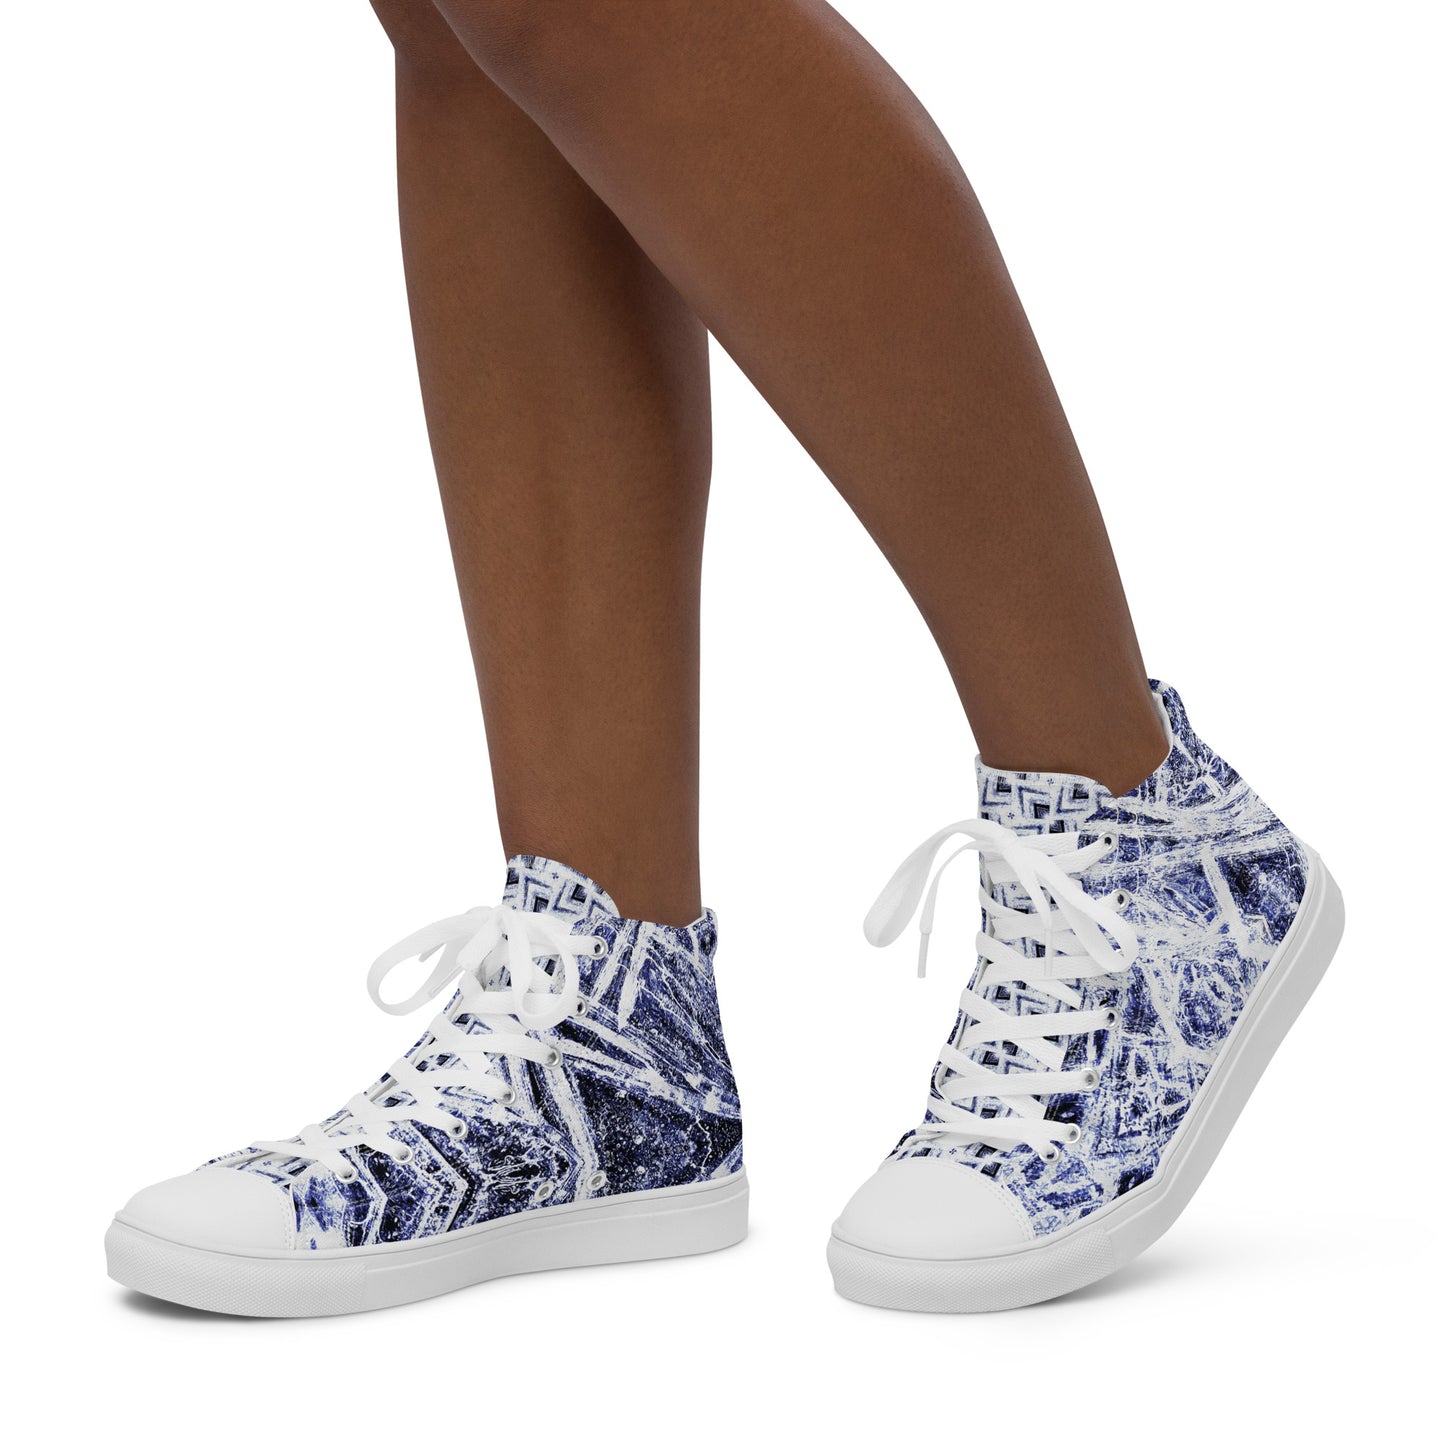 Women’s High Top Canvas Sneakers - Ice Crystals